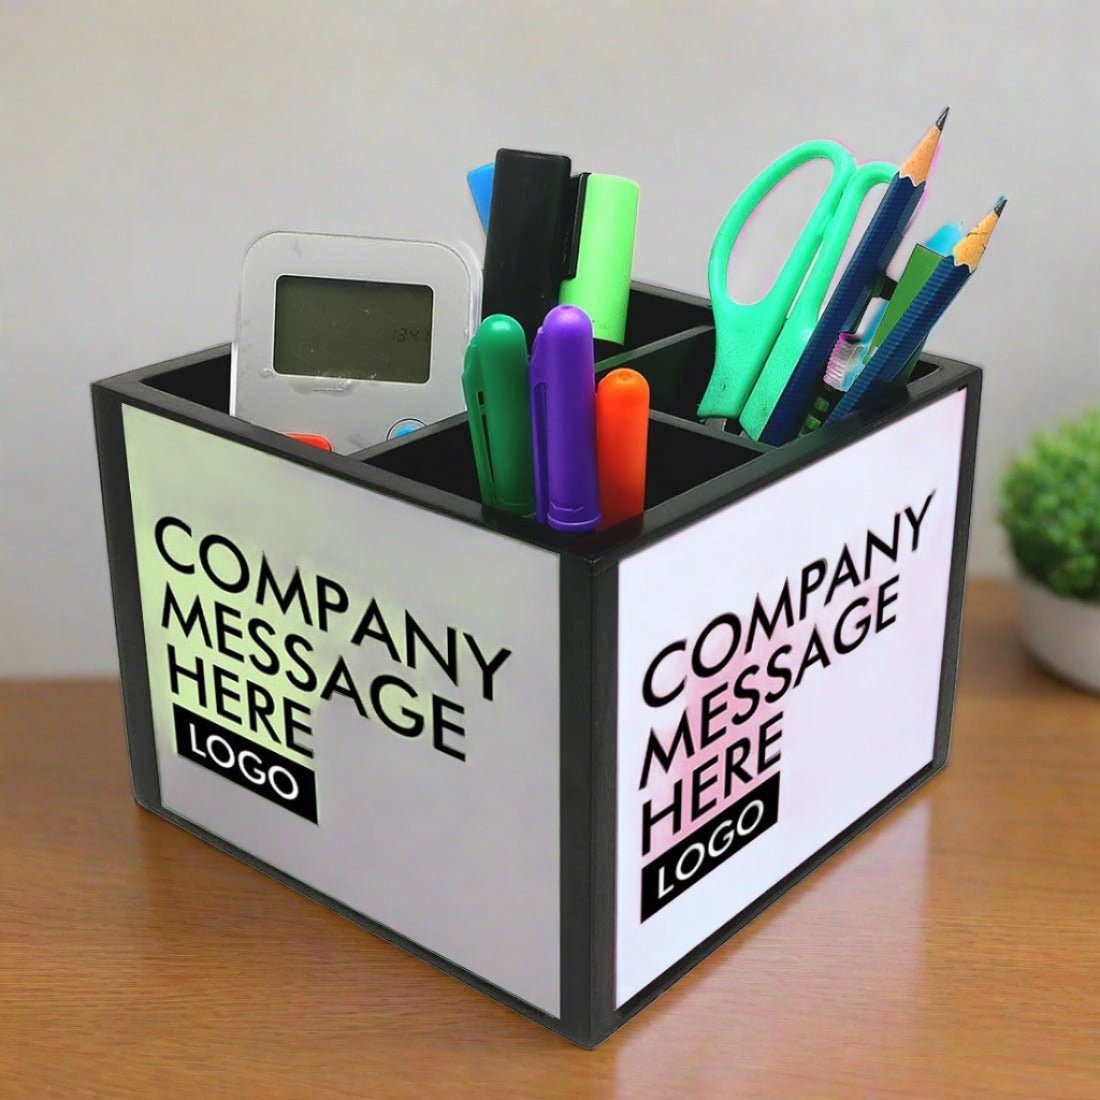 PERSONALIZED DESK ORGANIZER HOLDER - CORPORATE GIFT (ADD YOUR MESSAGE) nutcaseshop